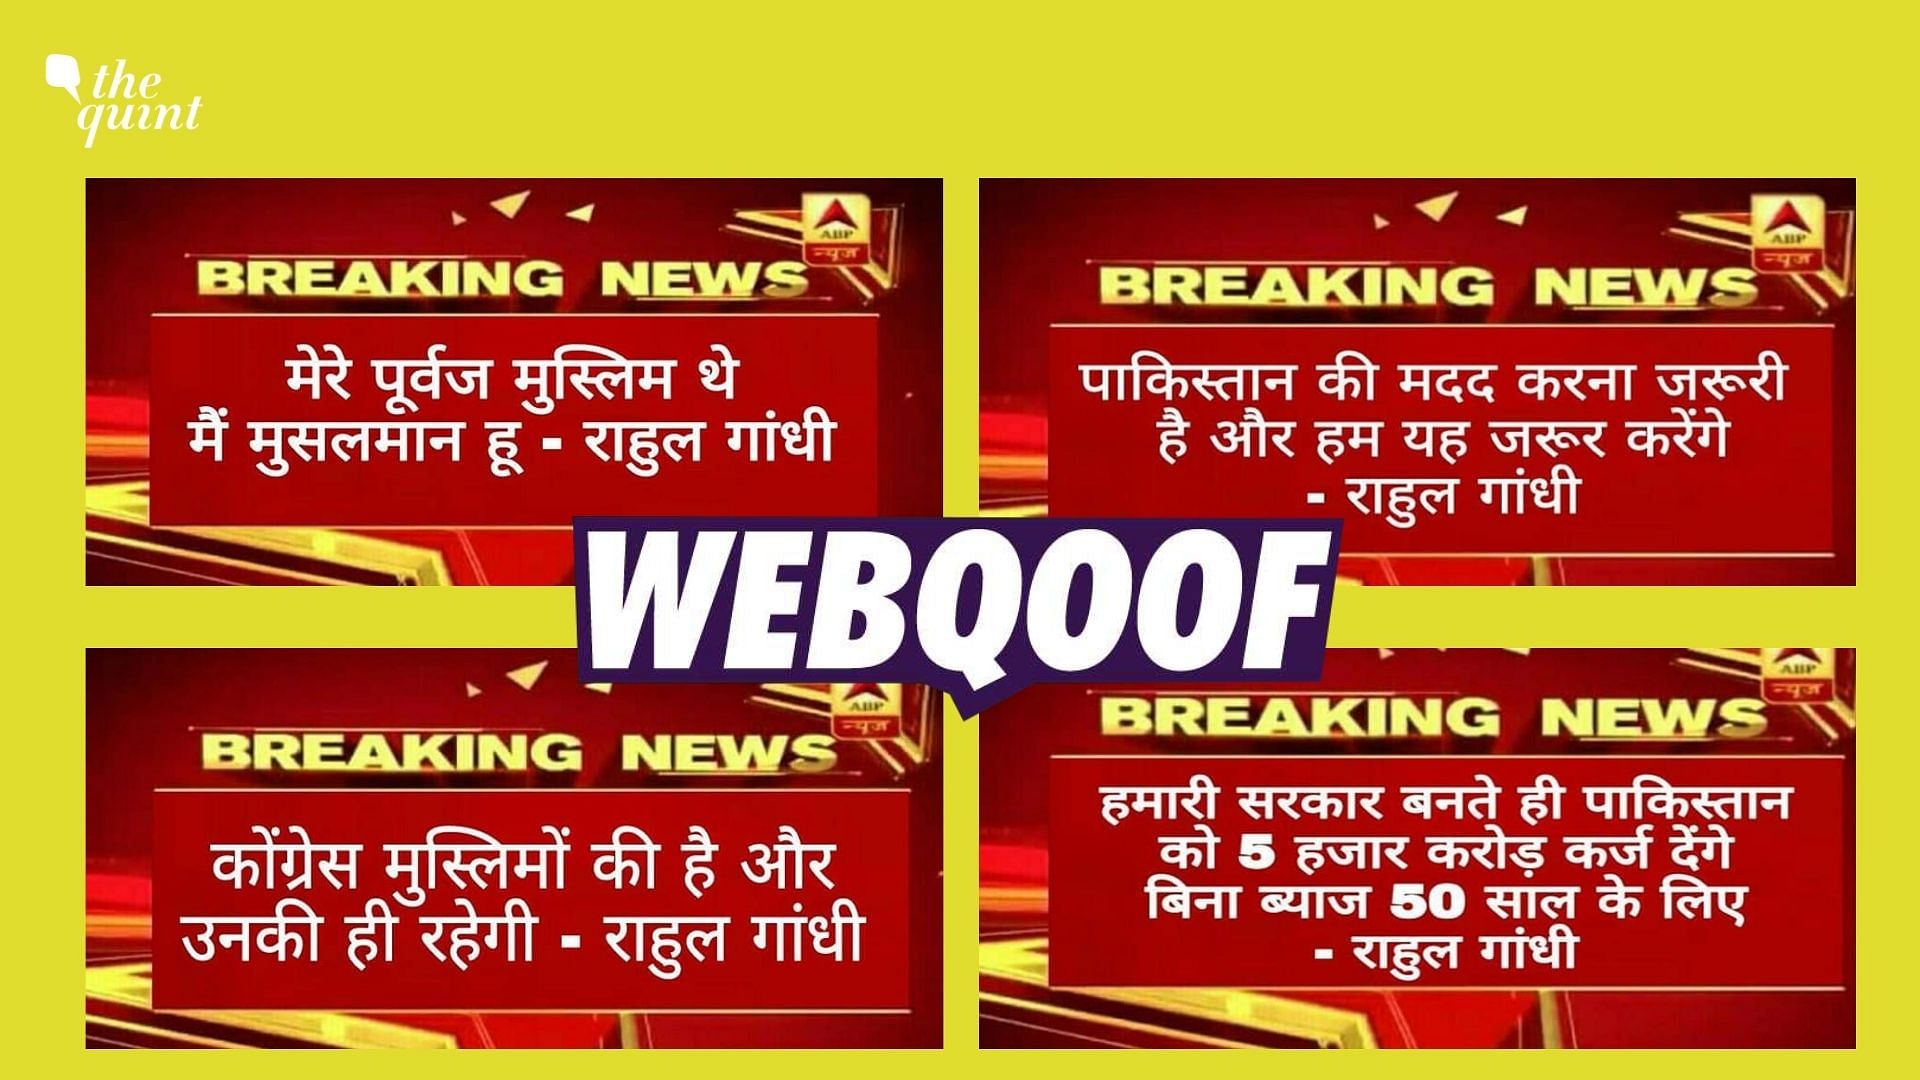 <div class="paragraphs"><p>Social media users shared morphed images of ABP News bulletin to falsely attribute statements to Rahul Gandhi.</p></div><div class="paragraphs"><p></p><p><br></p></div>